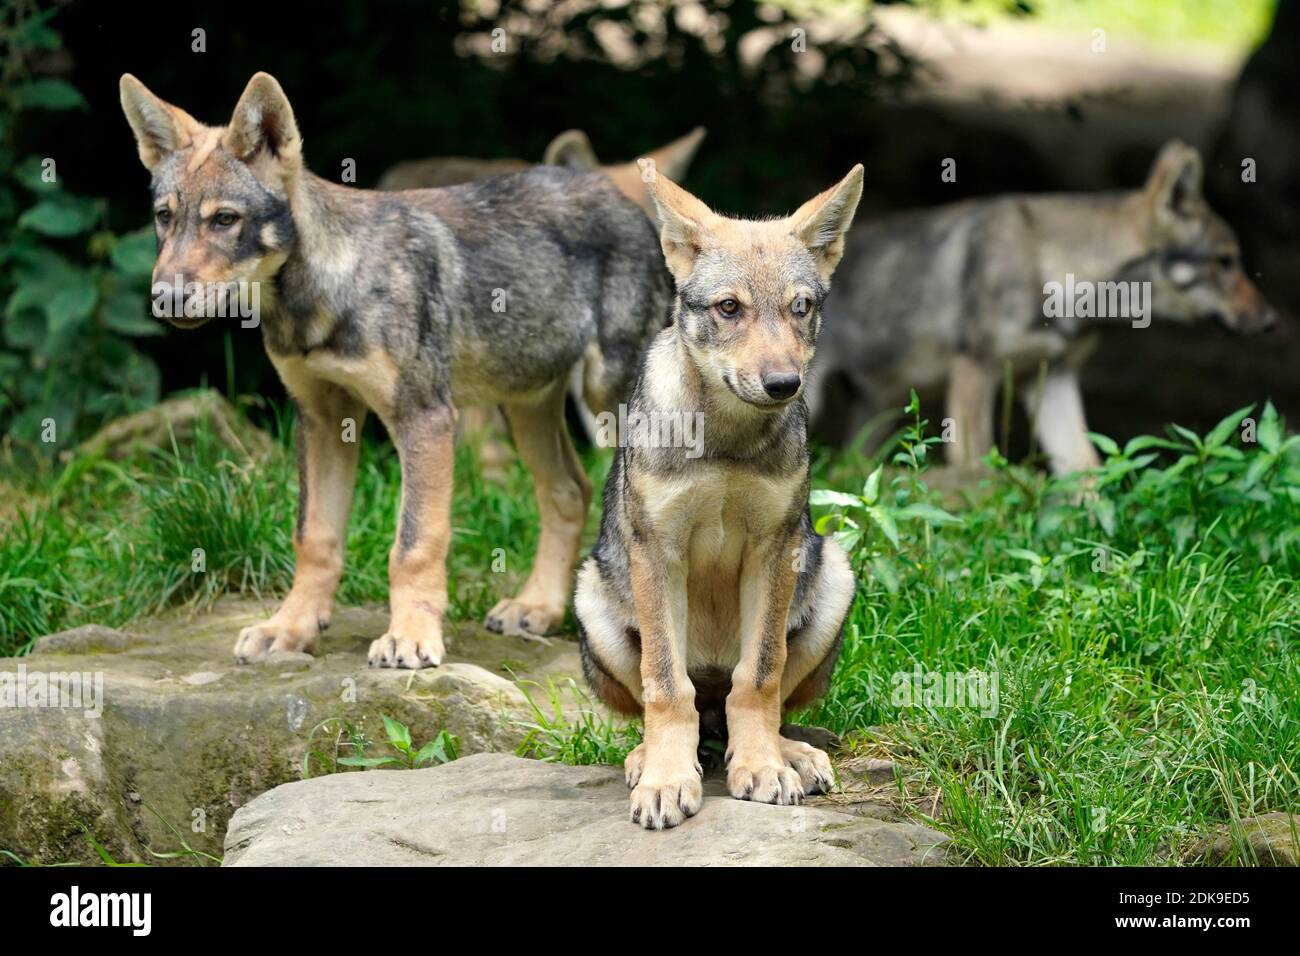 European wolf (Canis lupus), puppy standing on stones, France Stock Photo